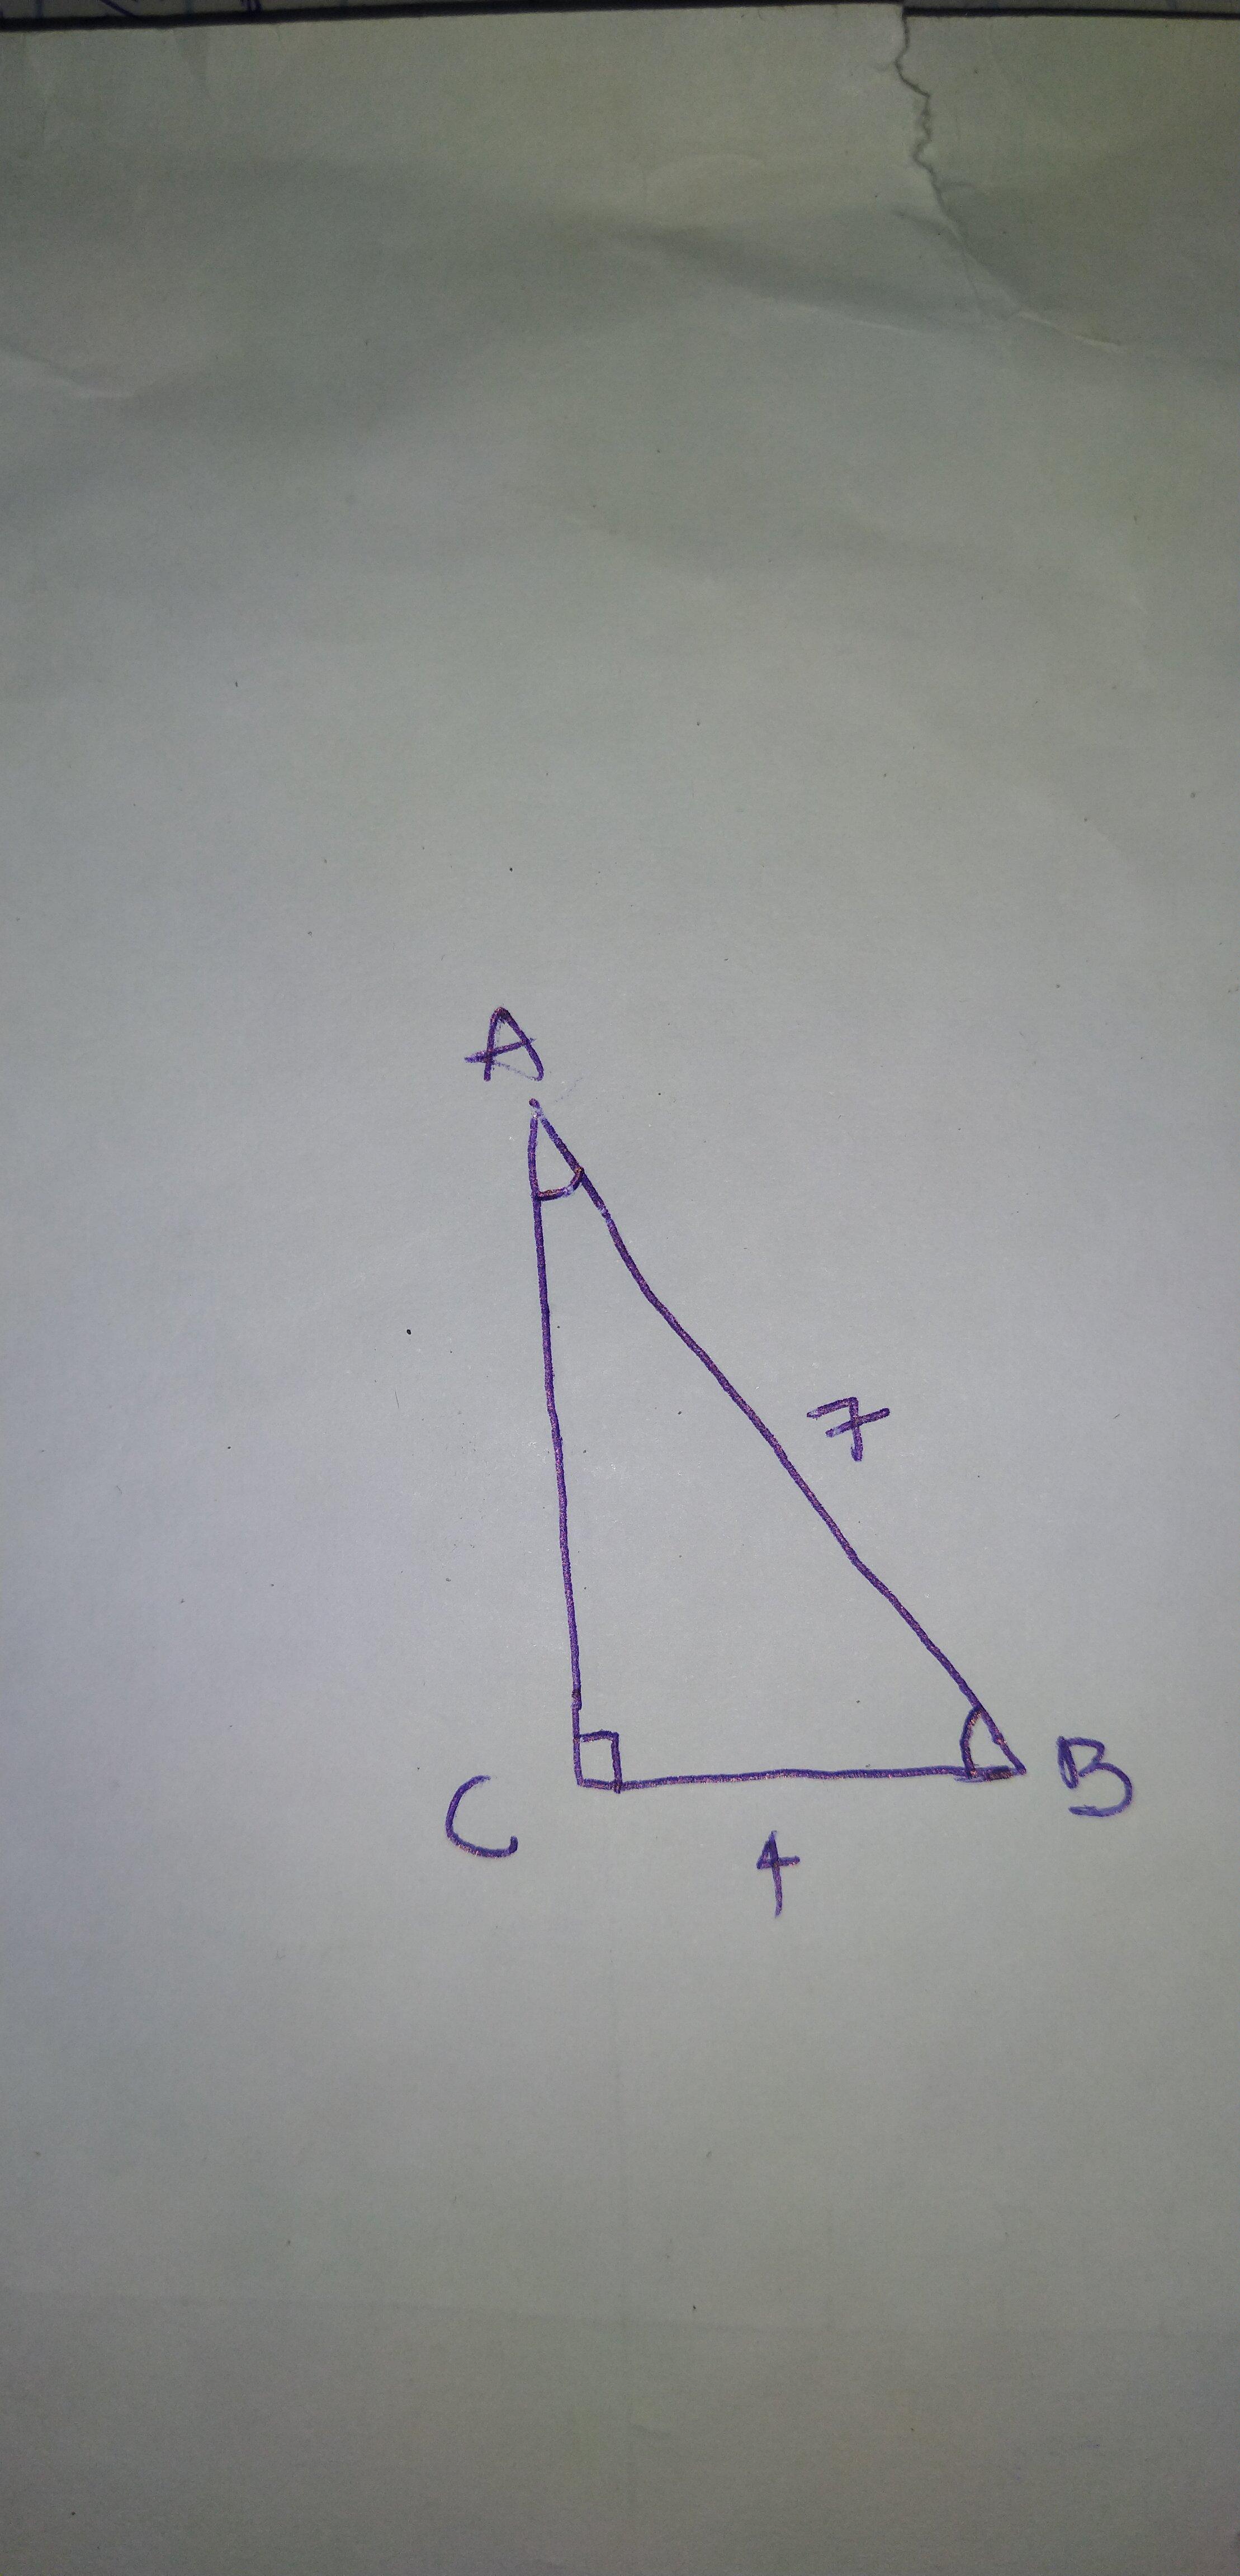 Triangle ABC Has A Right Angle At C. Next, Side AB=7m And Side CB=4m. Using Inverse Trigonometric Functions,